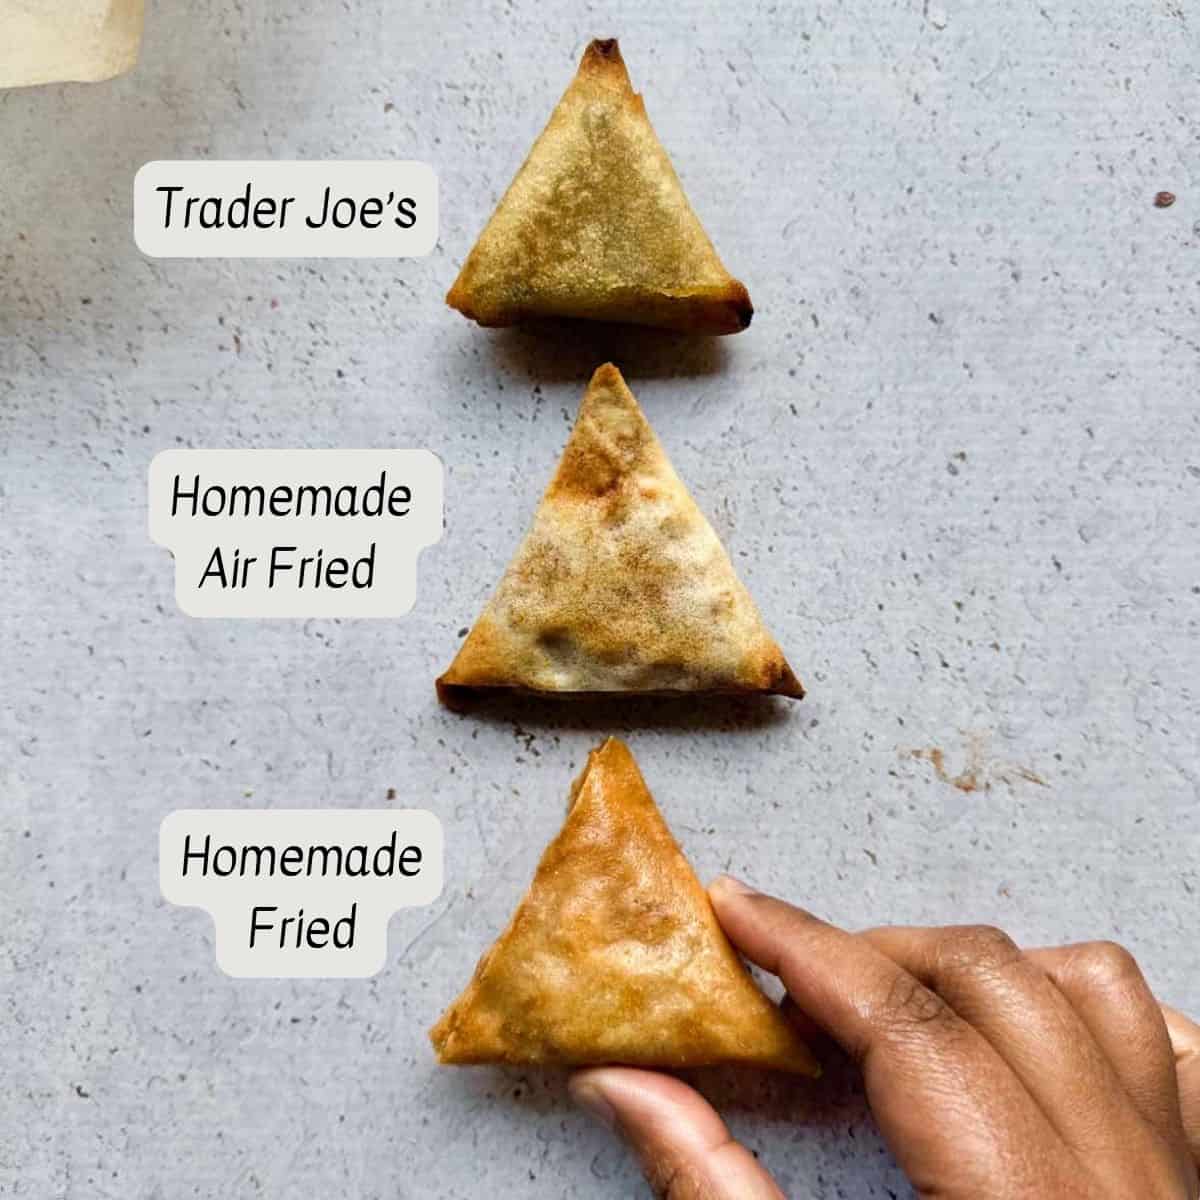 Three cocktail samosas. The top one is a Trader Joe’s spicy pumpkin samosa. The middle is a homemade sweet potato samosas that was air fried. The bottom samosas is one that is also homemade but was fried.